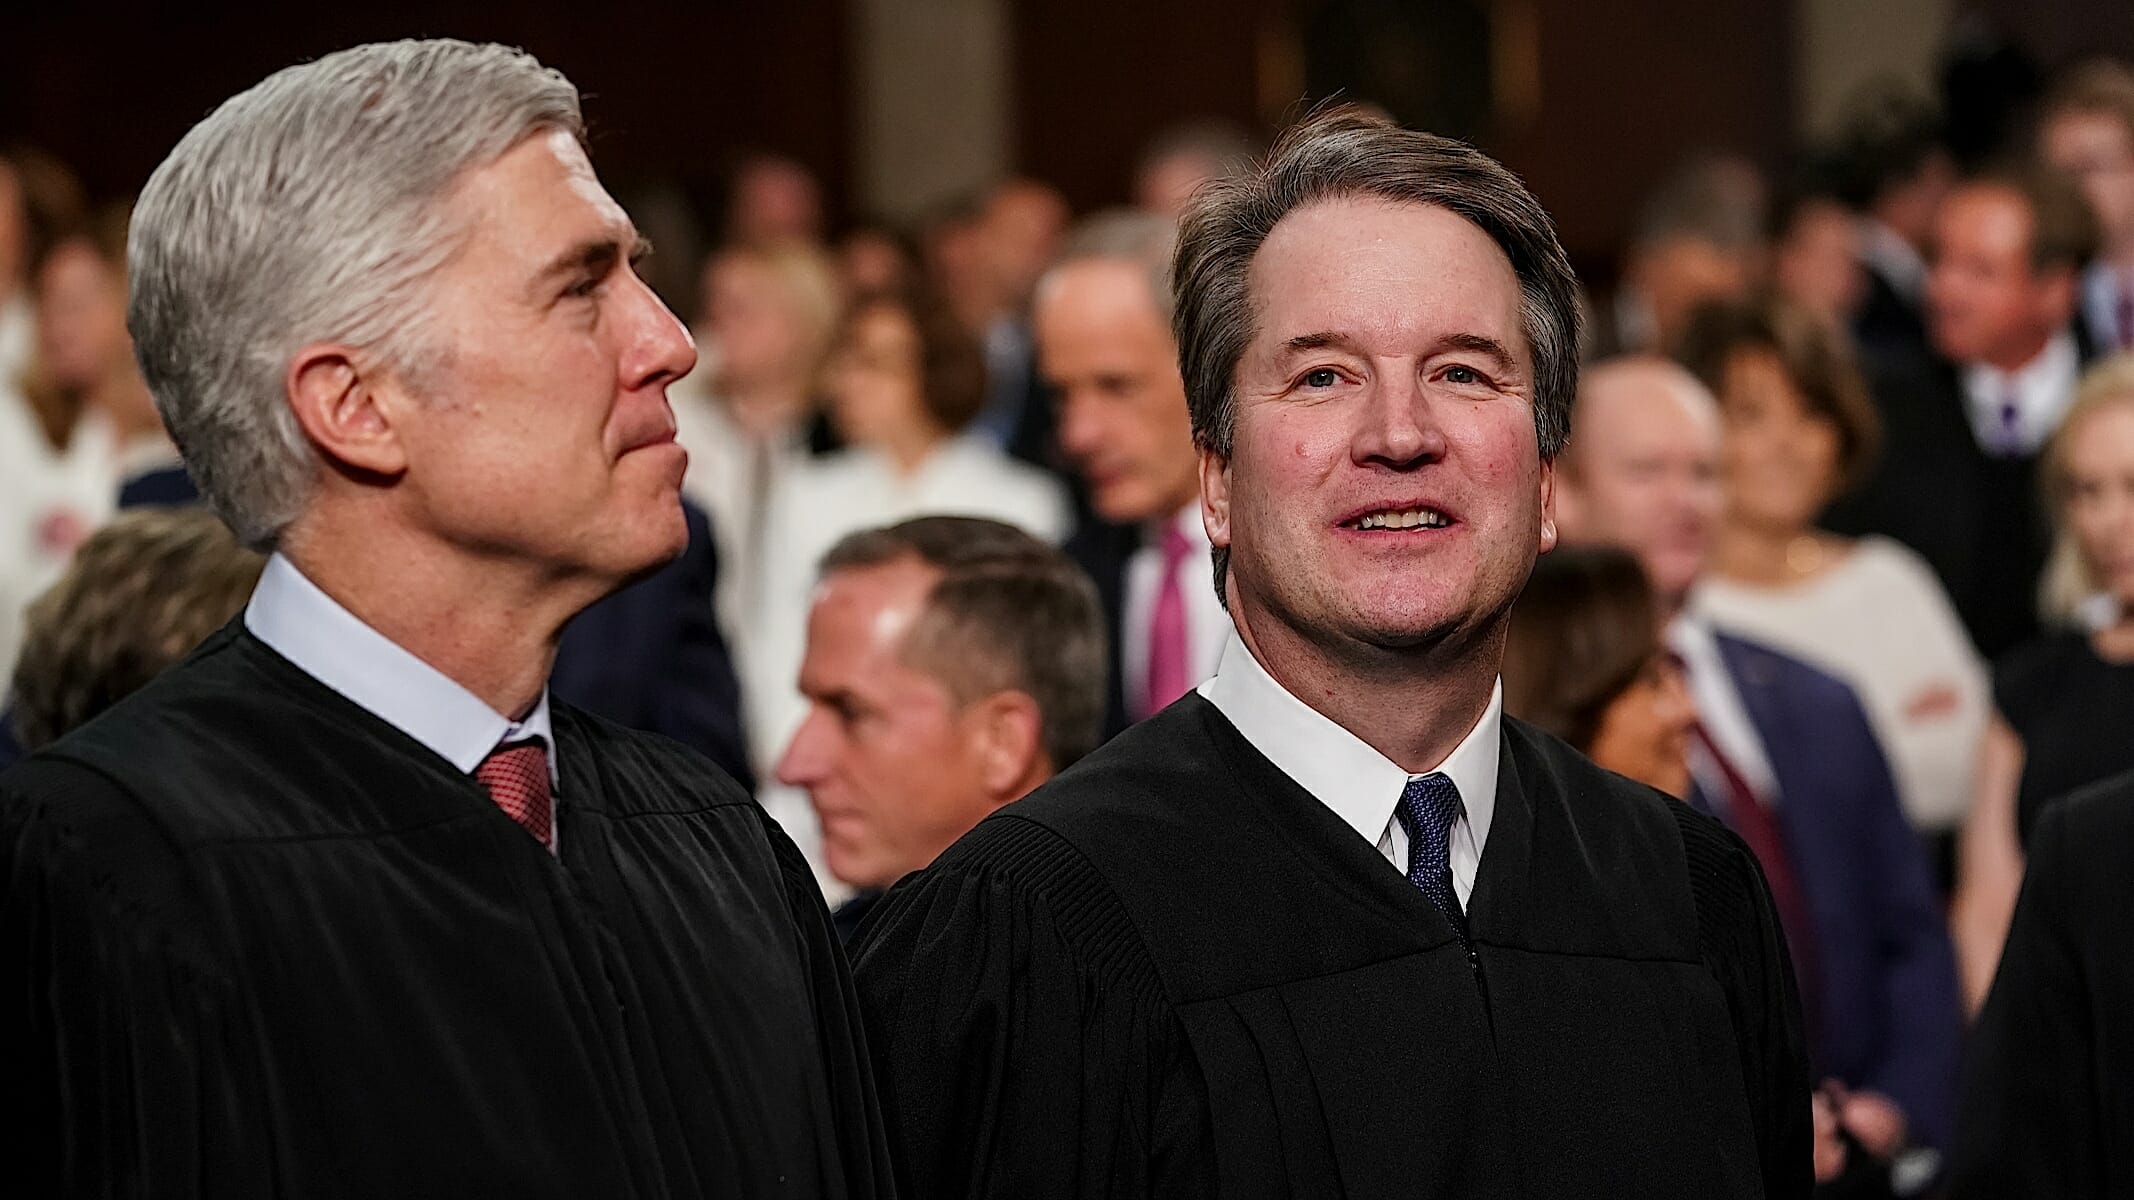 Is the Supreme Court Anything More Than a Partisan Joke? With Two Cases, We’re About to Find Out